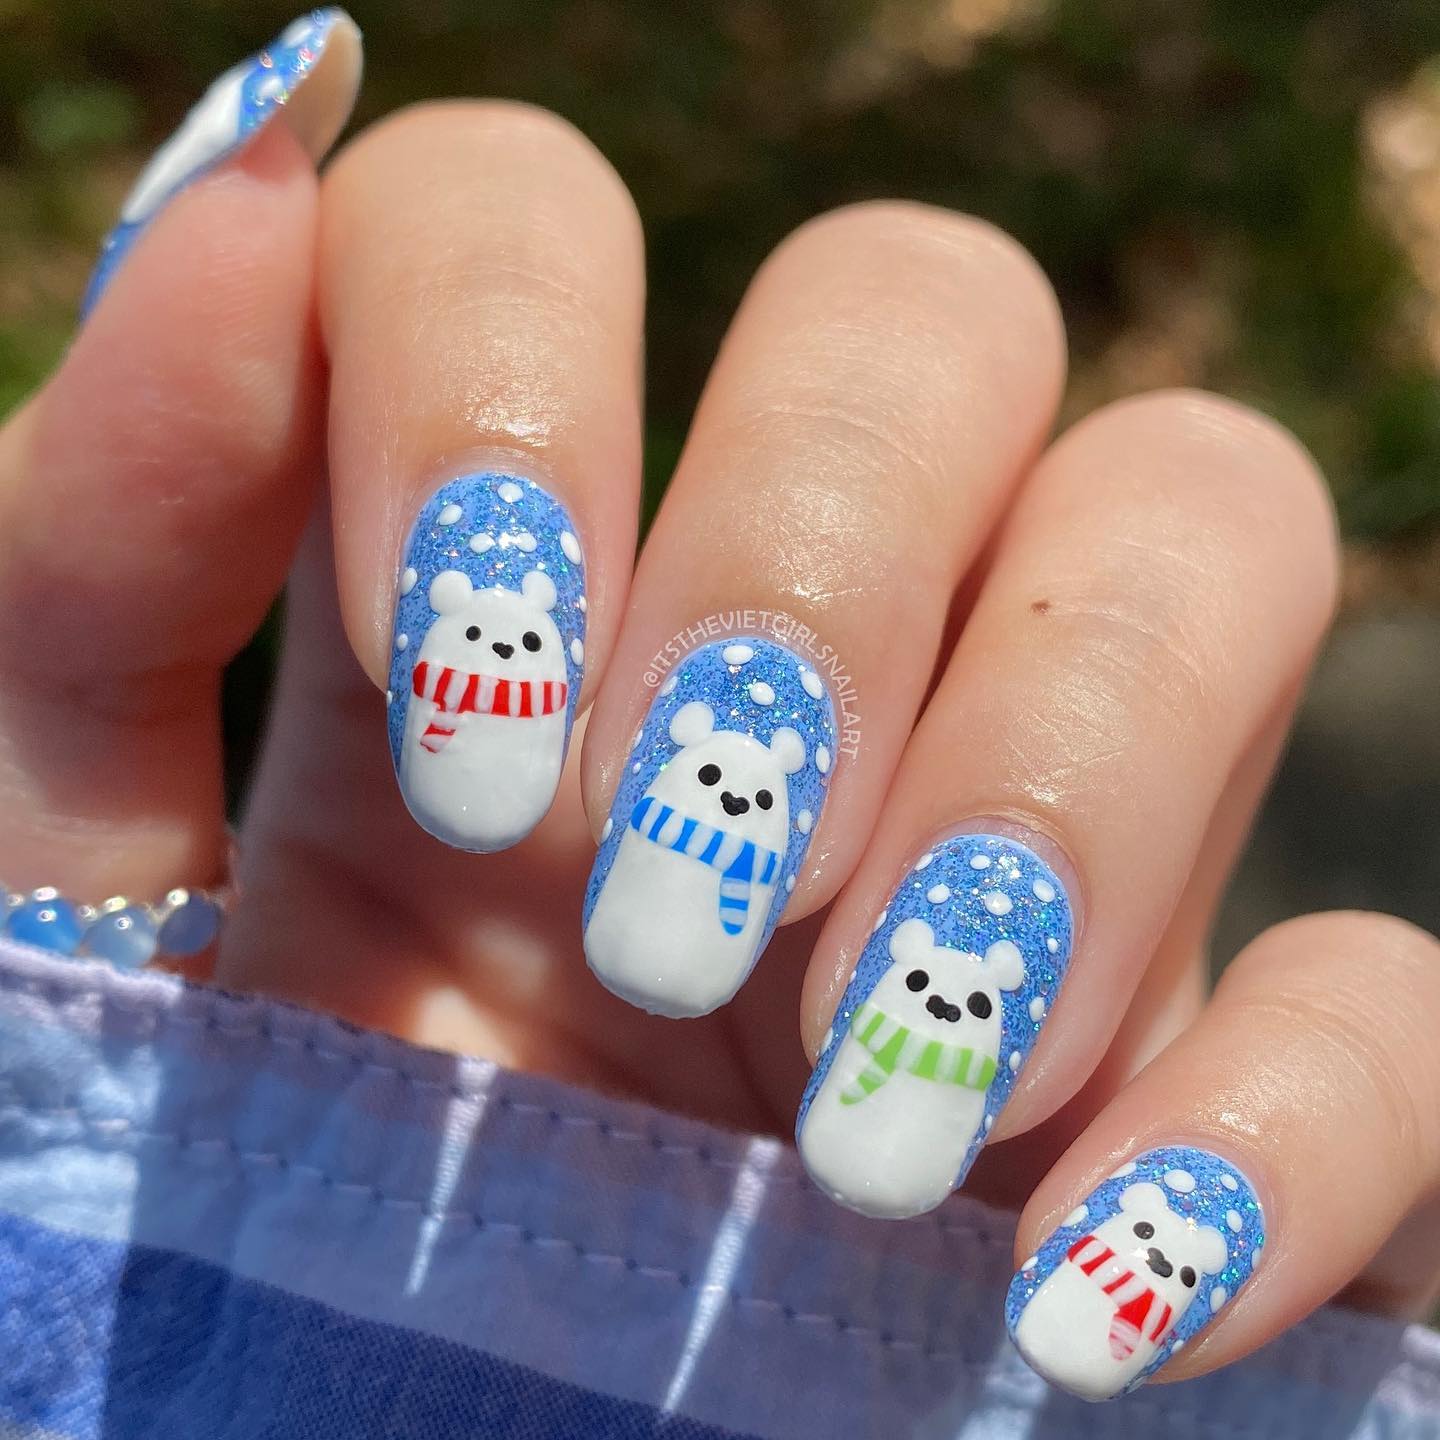 When we say winter, one of the things that come to our minds is polar bears! Here is a cute polar bear nail art.